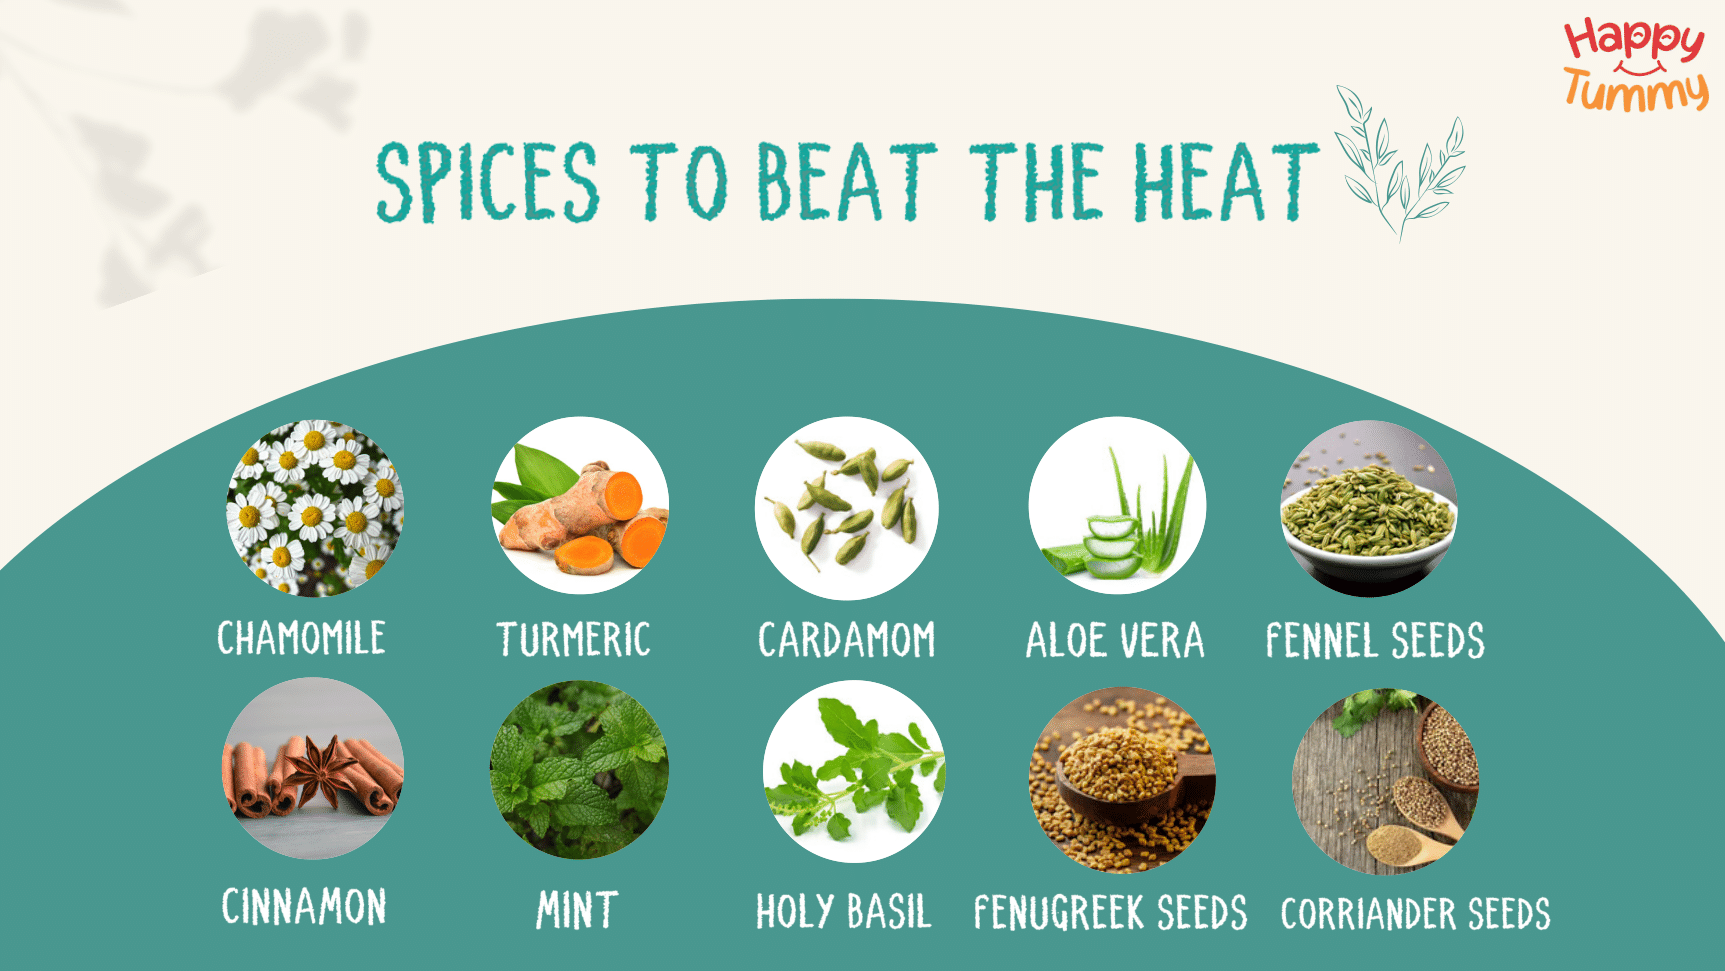 benefits of herbs chart  Healing Herbs and Spices Chart for the